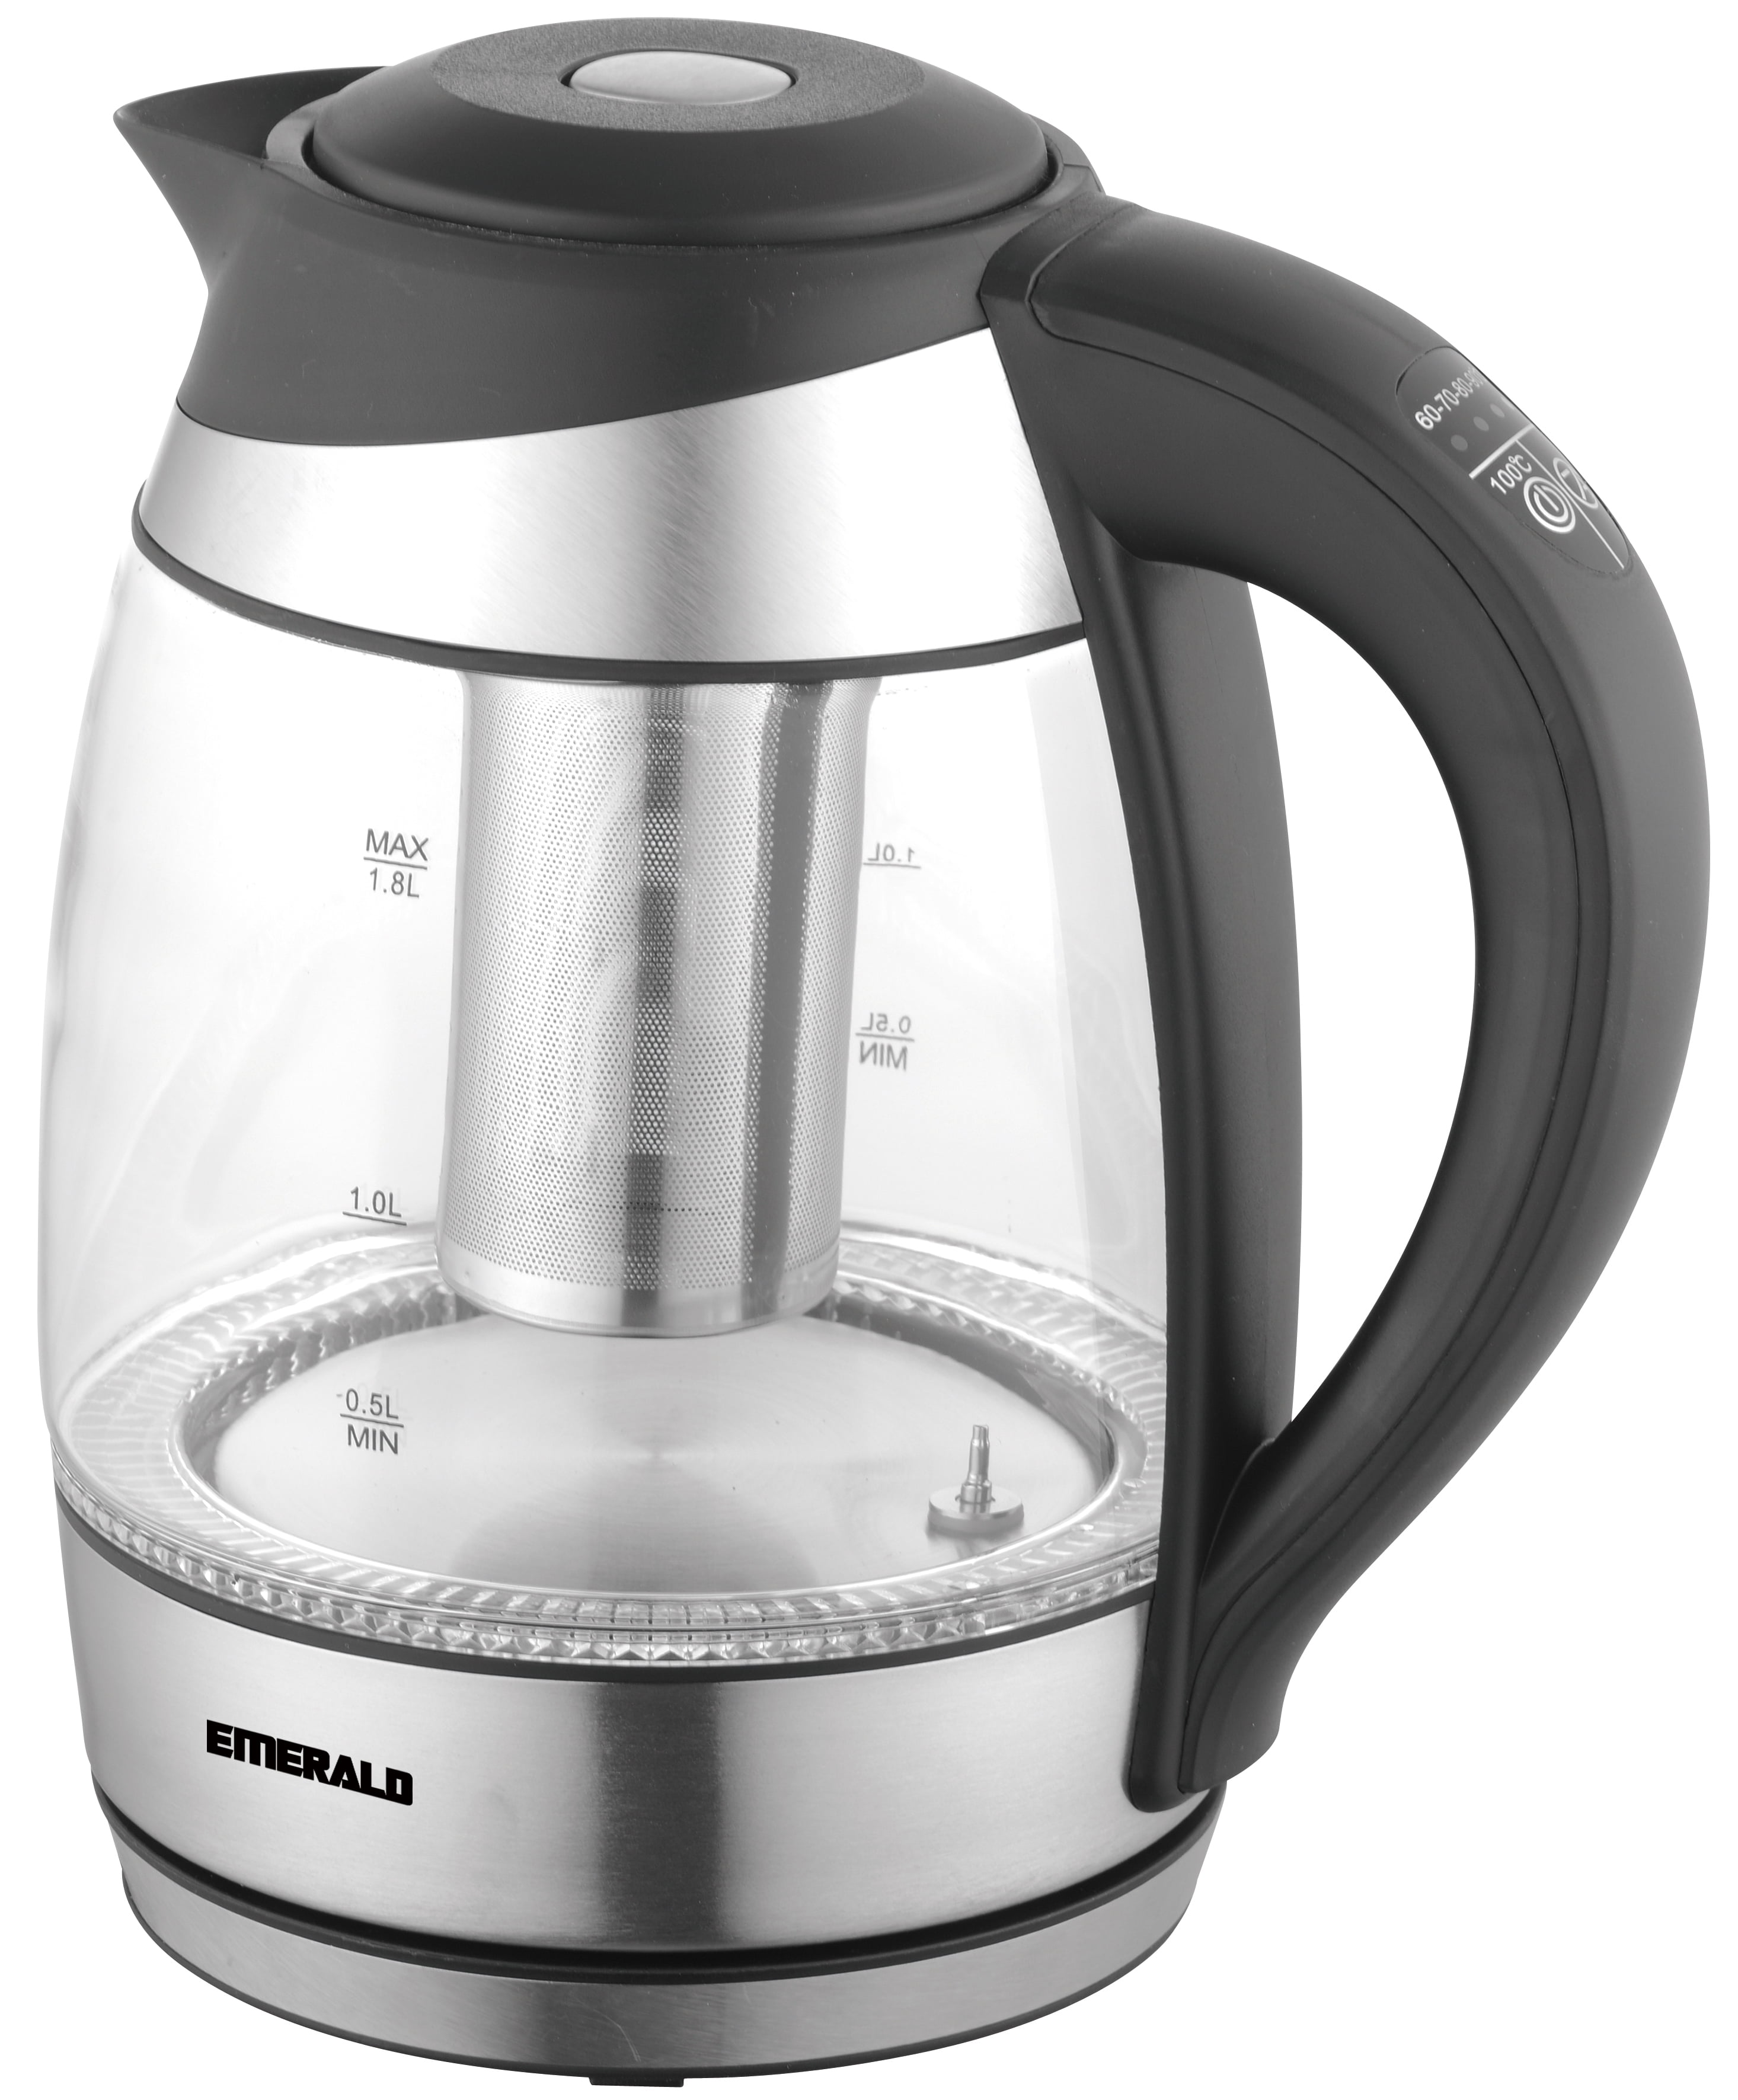 1.8L ELECTRIC GLASS KETTLE W/ TEA INFUSER (Cookinex)